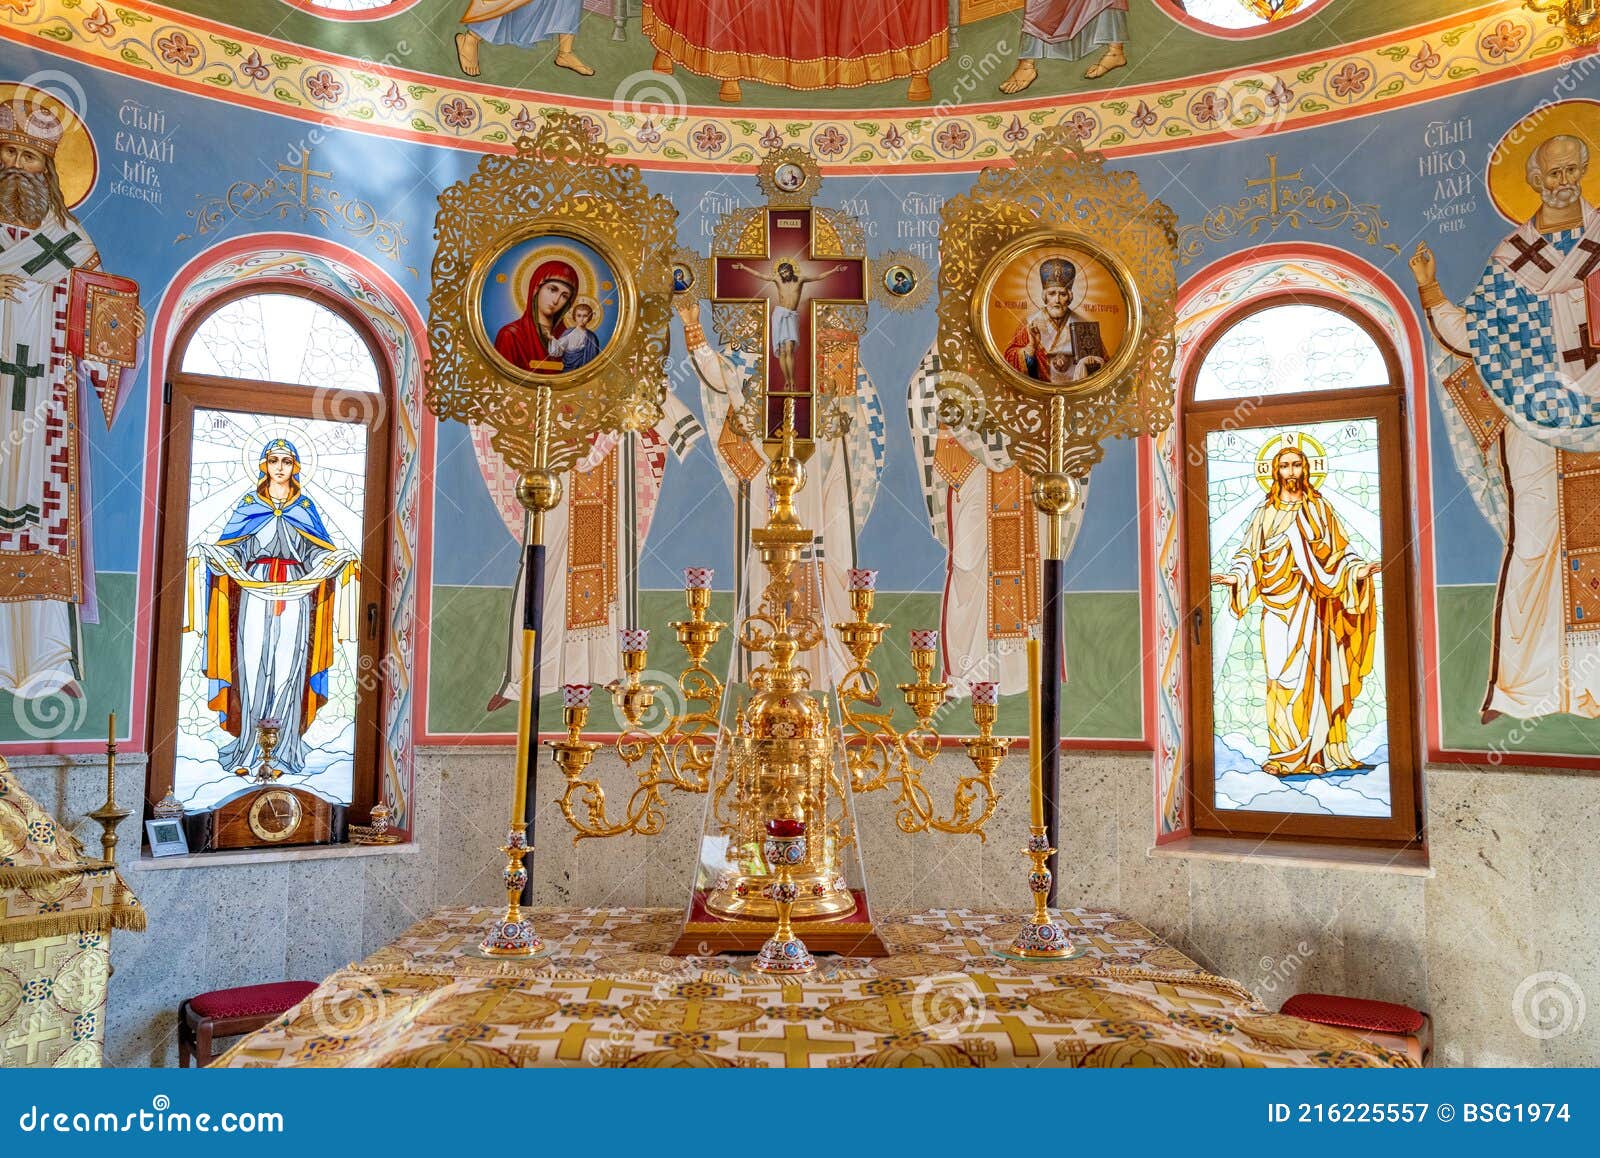 the throne of the orthodox church in the altar. religious holidays concept. orthodoxy.